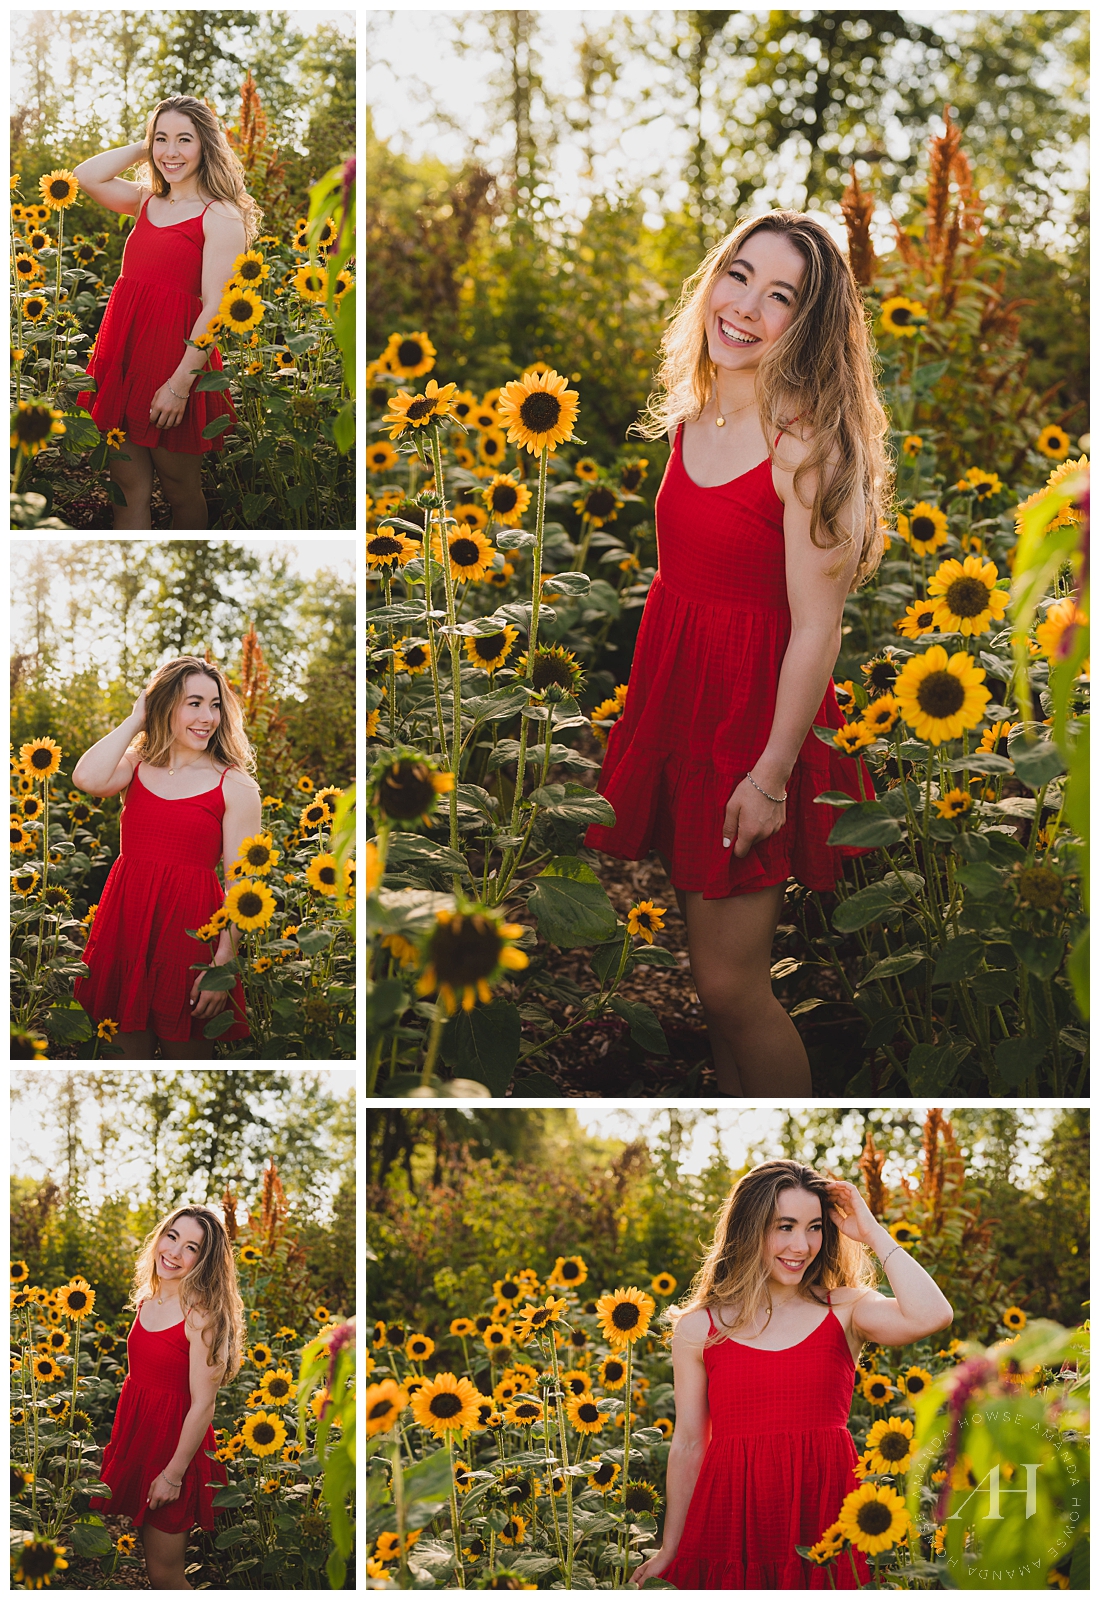 Senior Girl in Field of Sunflowers | Wild Hearts Farm, Tacoma, WA. Senior Style Guide, Posing Among the Sunflowers | Photographed by the Best Tacoma Senior Photographer Amanda Howse Photography